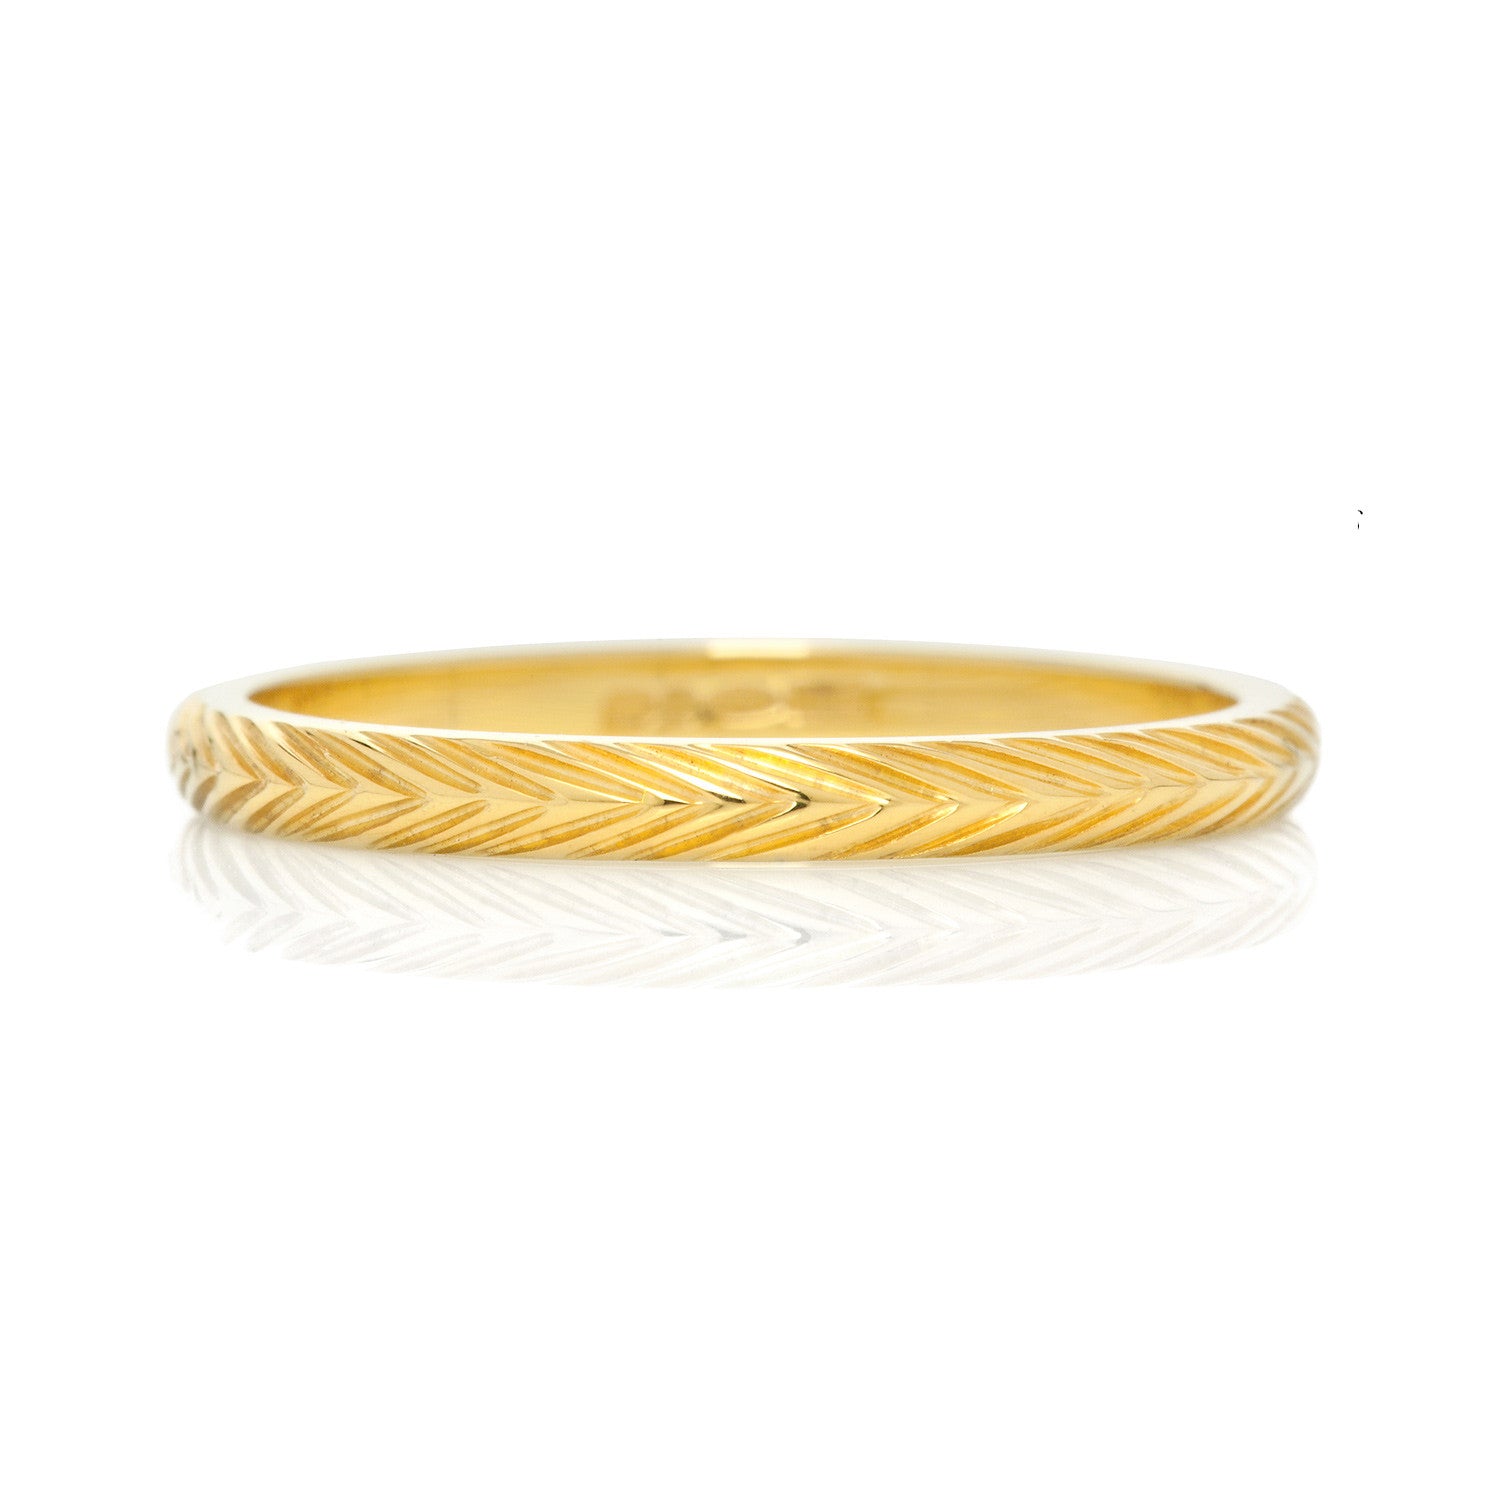 Wheat Sheaf Engraved Ethical Gold Wedding Ring, 2mm